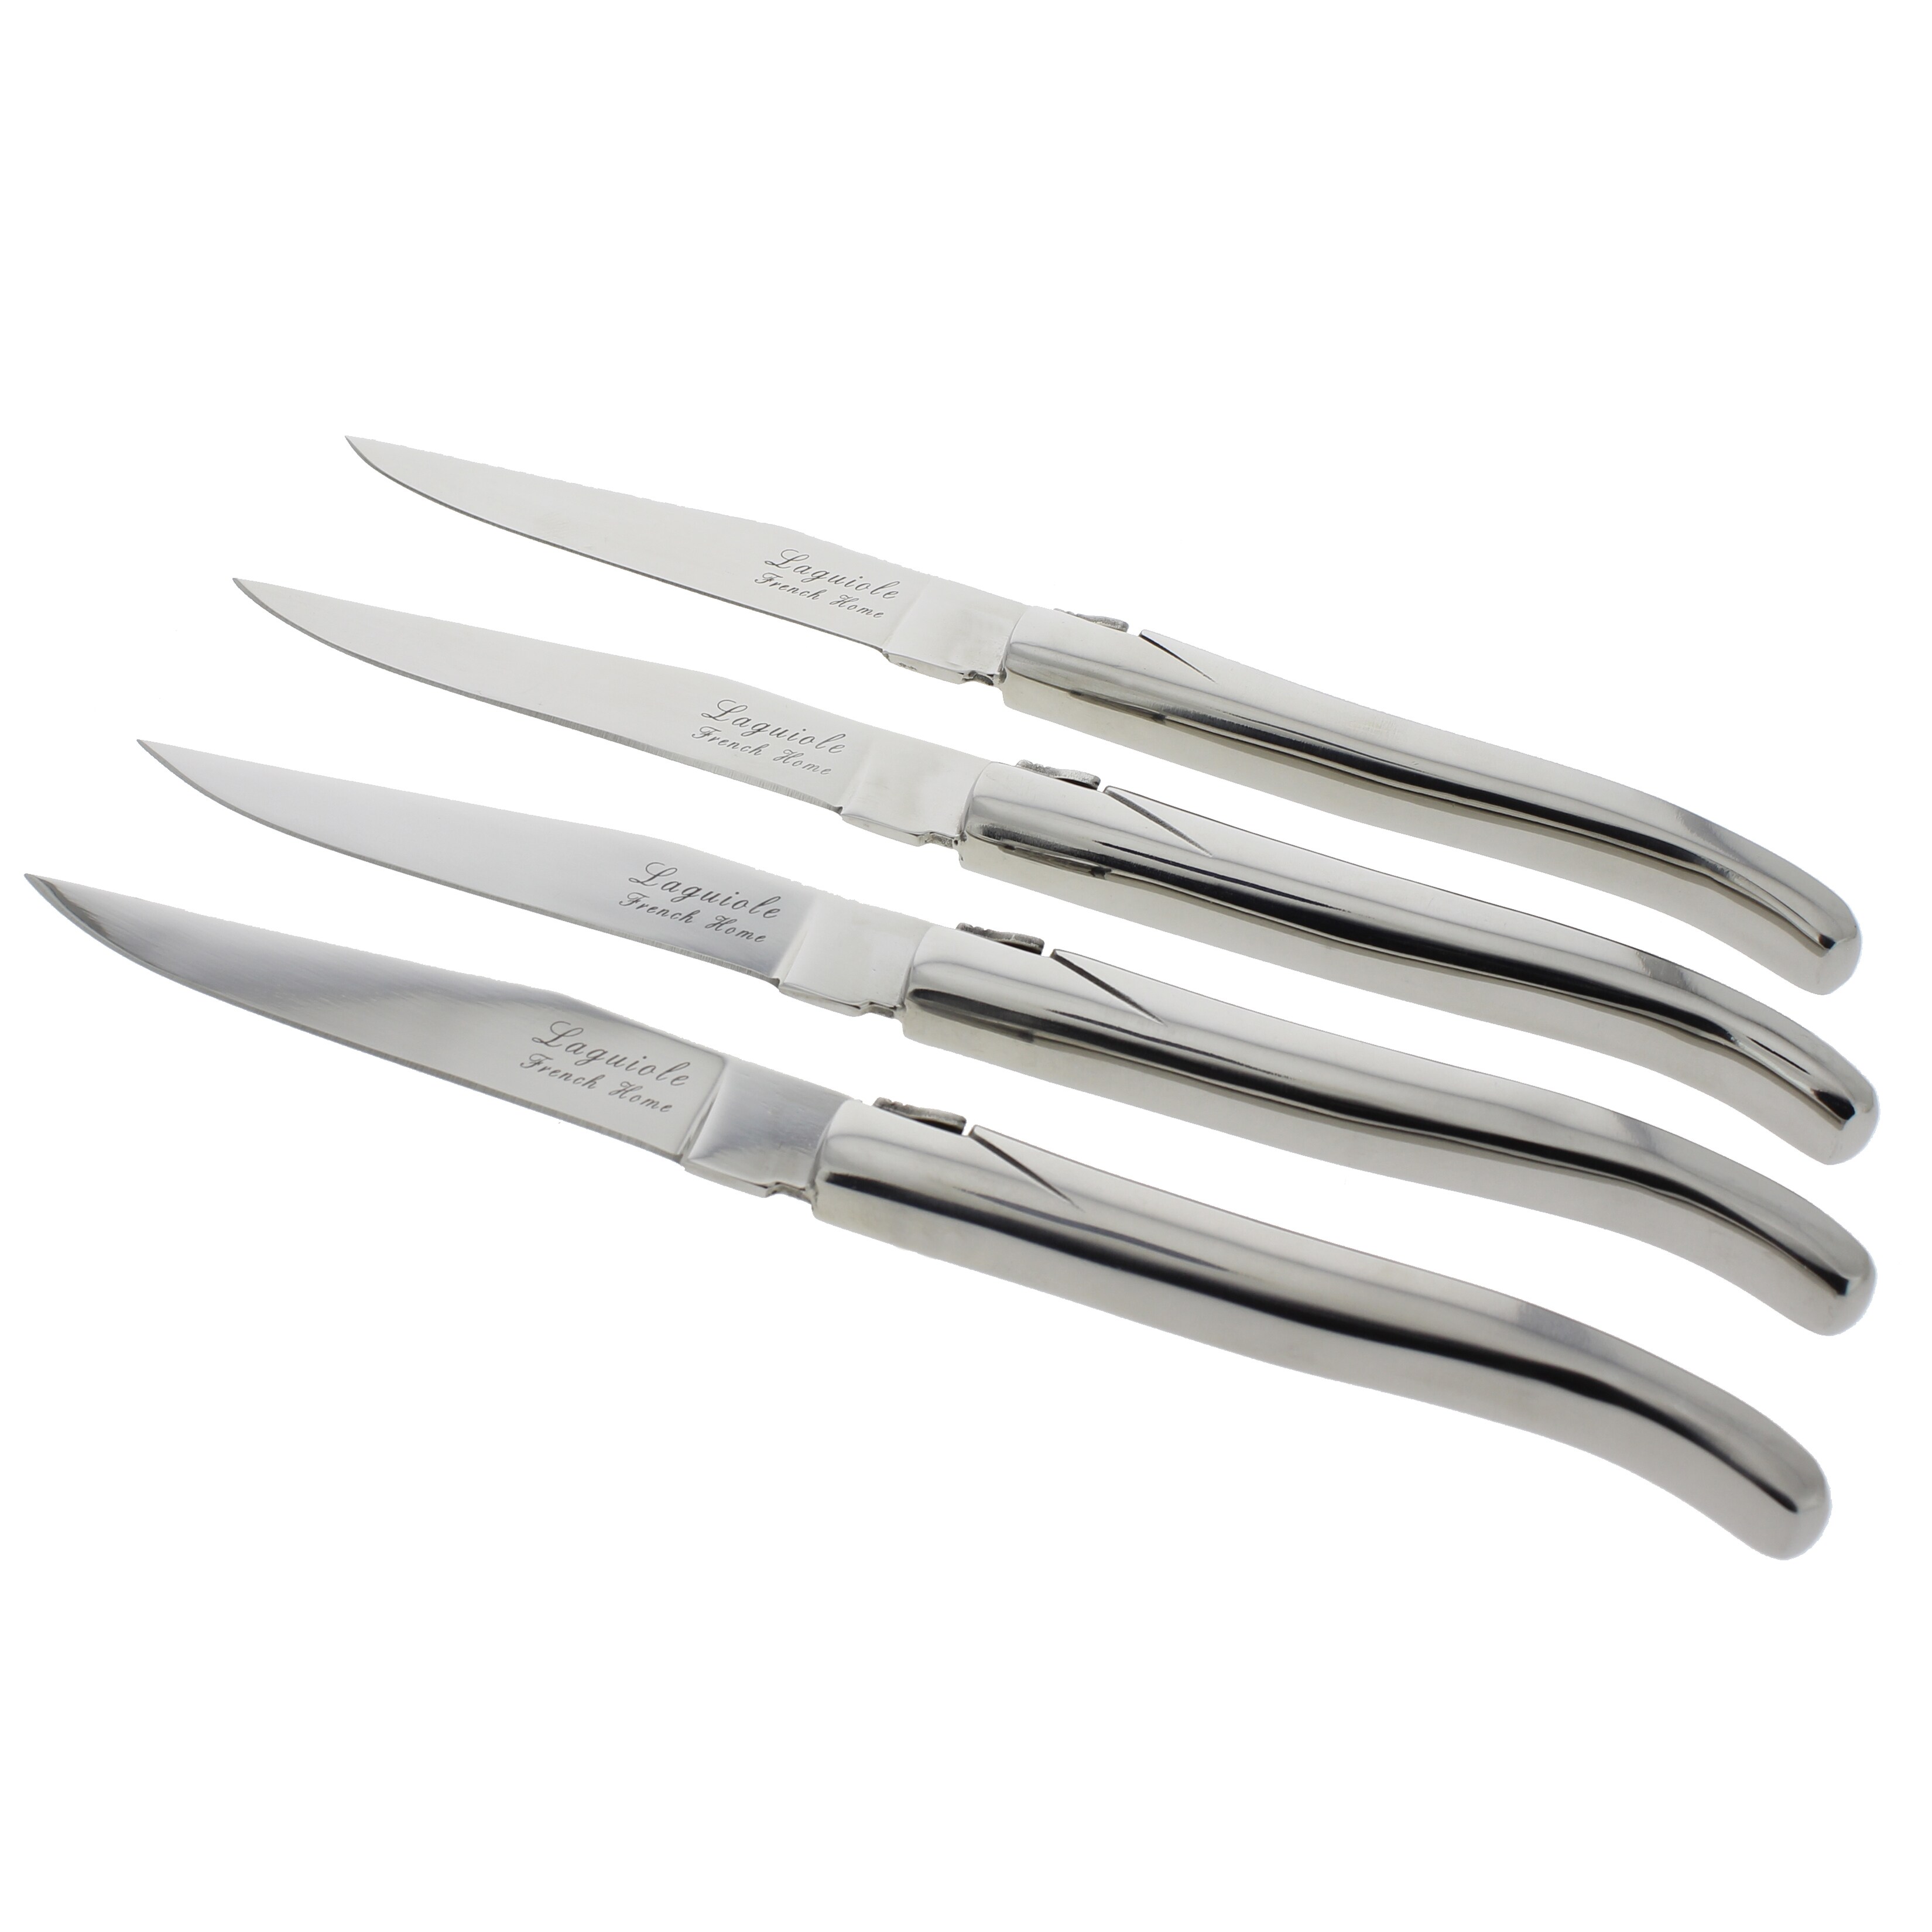 https://ak1.ostkcdn.com/images/products/10695362/French-Home-Set-of-4-Laguiole-Connoisseur-Stainless-Steel-Steak-Knives-Silver-1dbd0d3d-7ff3-4d67-b953-44dc67a9e1a1.jpg